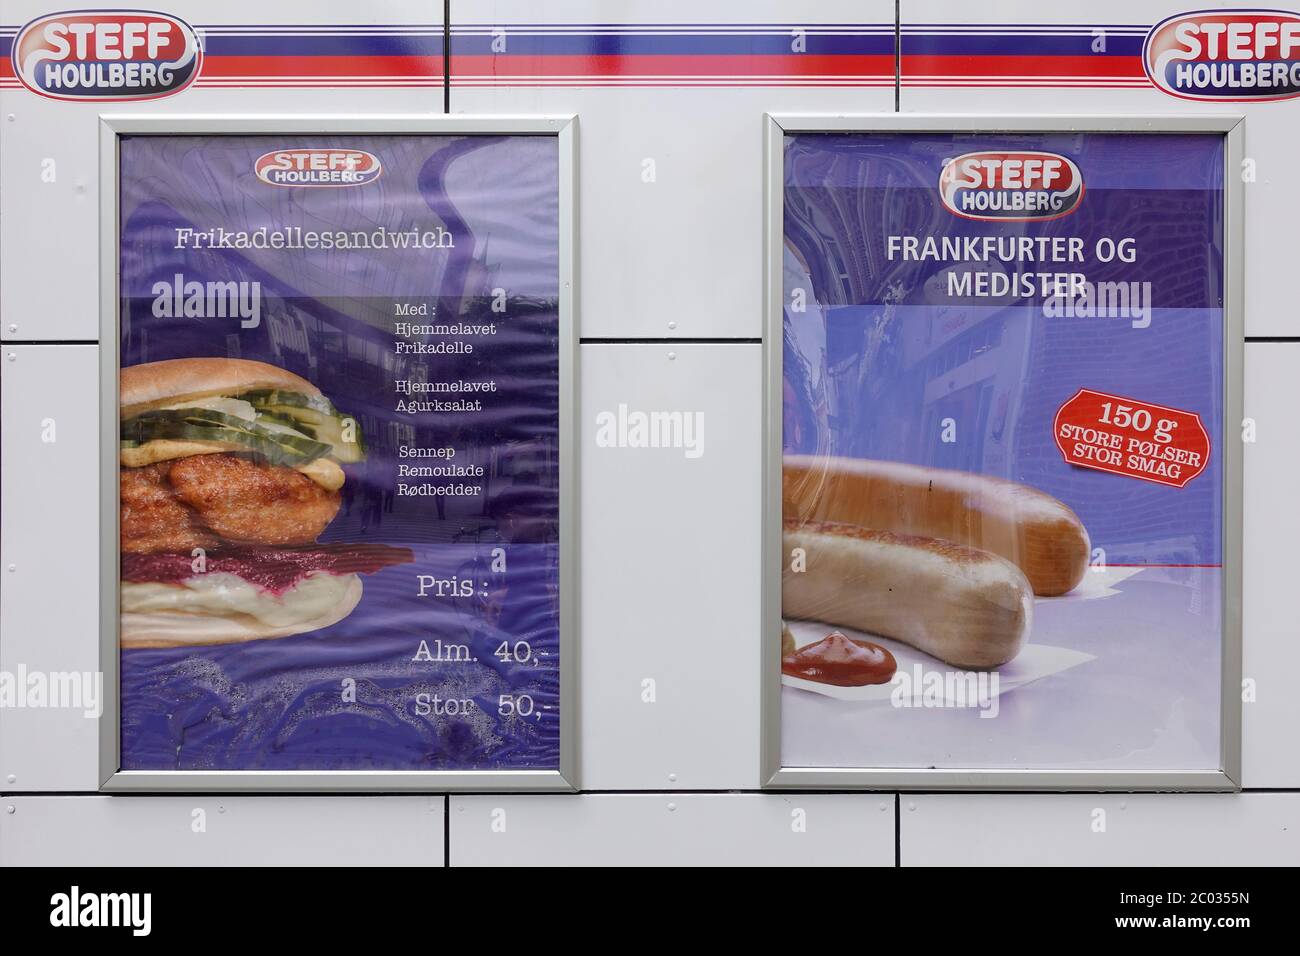 Posters Advertising Steff Houlberg Fast Food Deli Sandwiches And  Frankfurter Sausages In Aarhus Denmark Stock Photo - Alamy